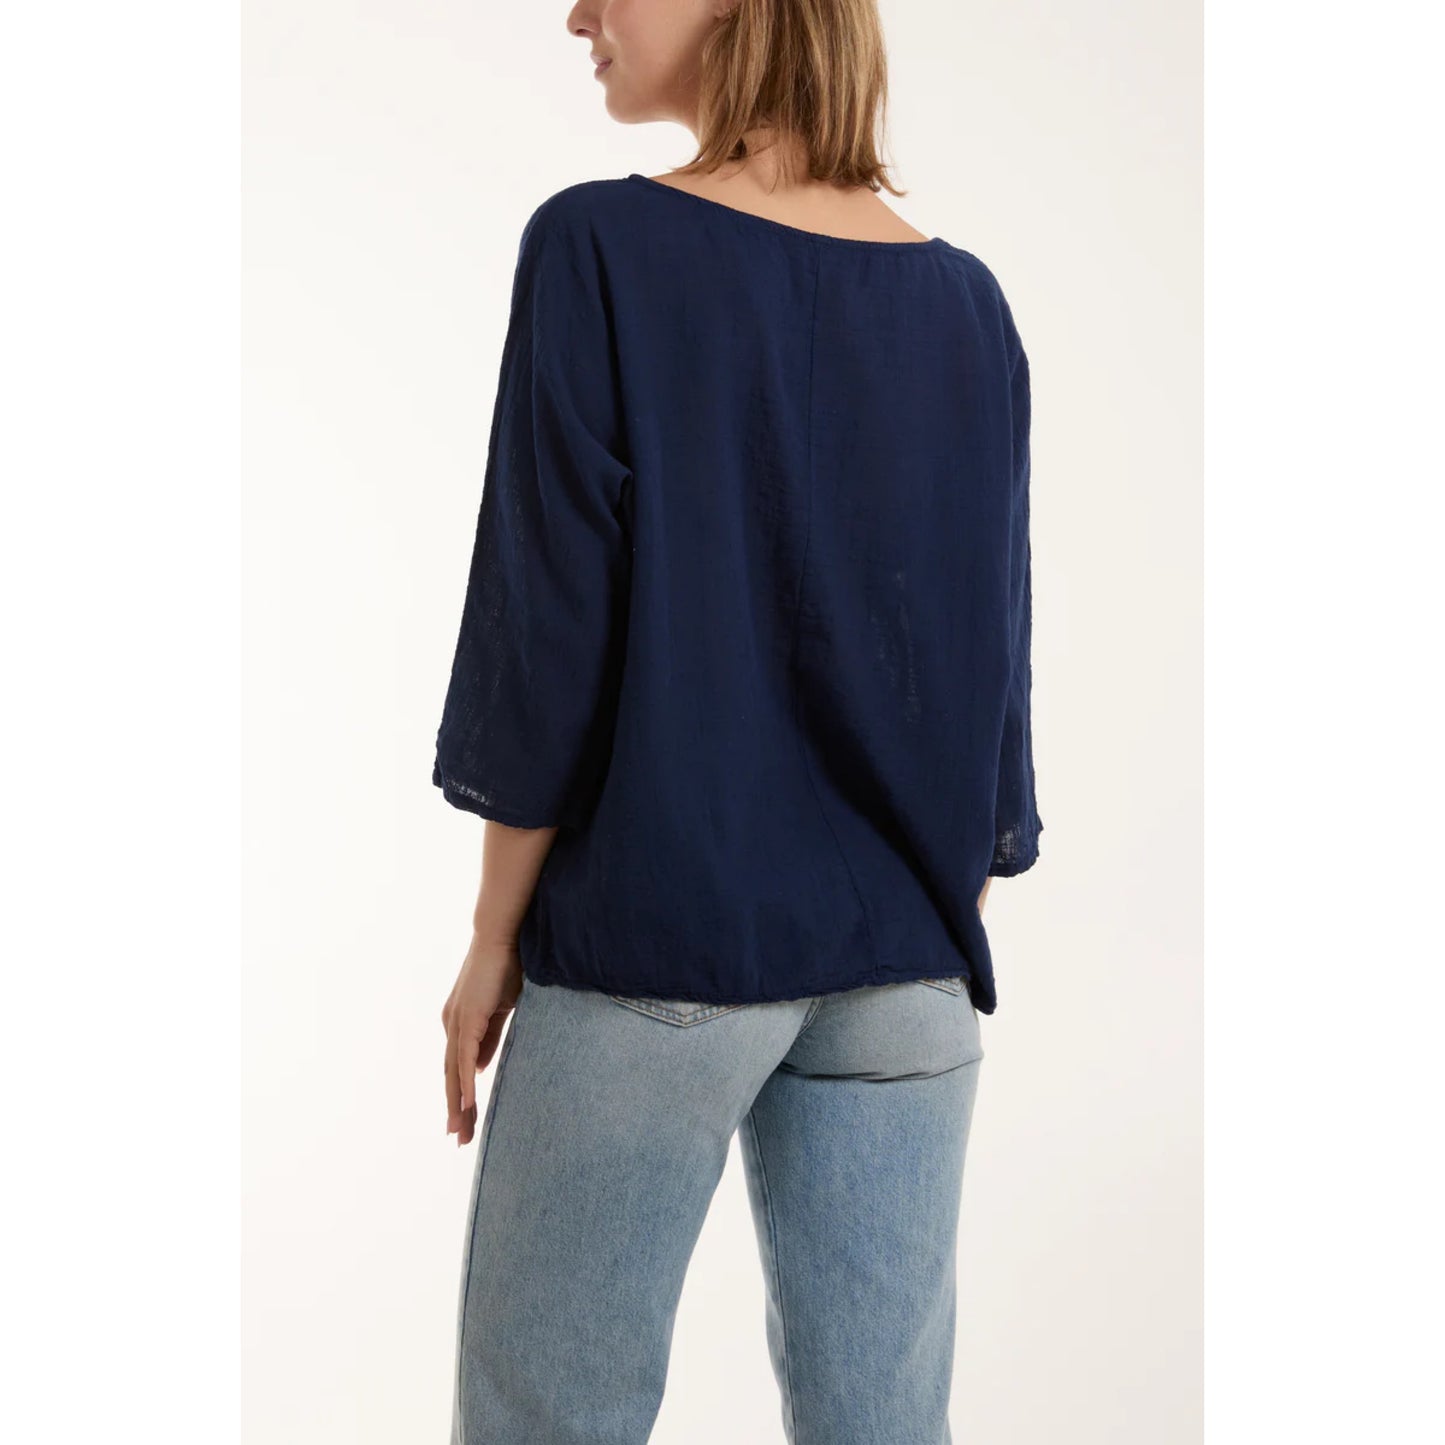 Relaxed 3/4 sleeve top - Navy